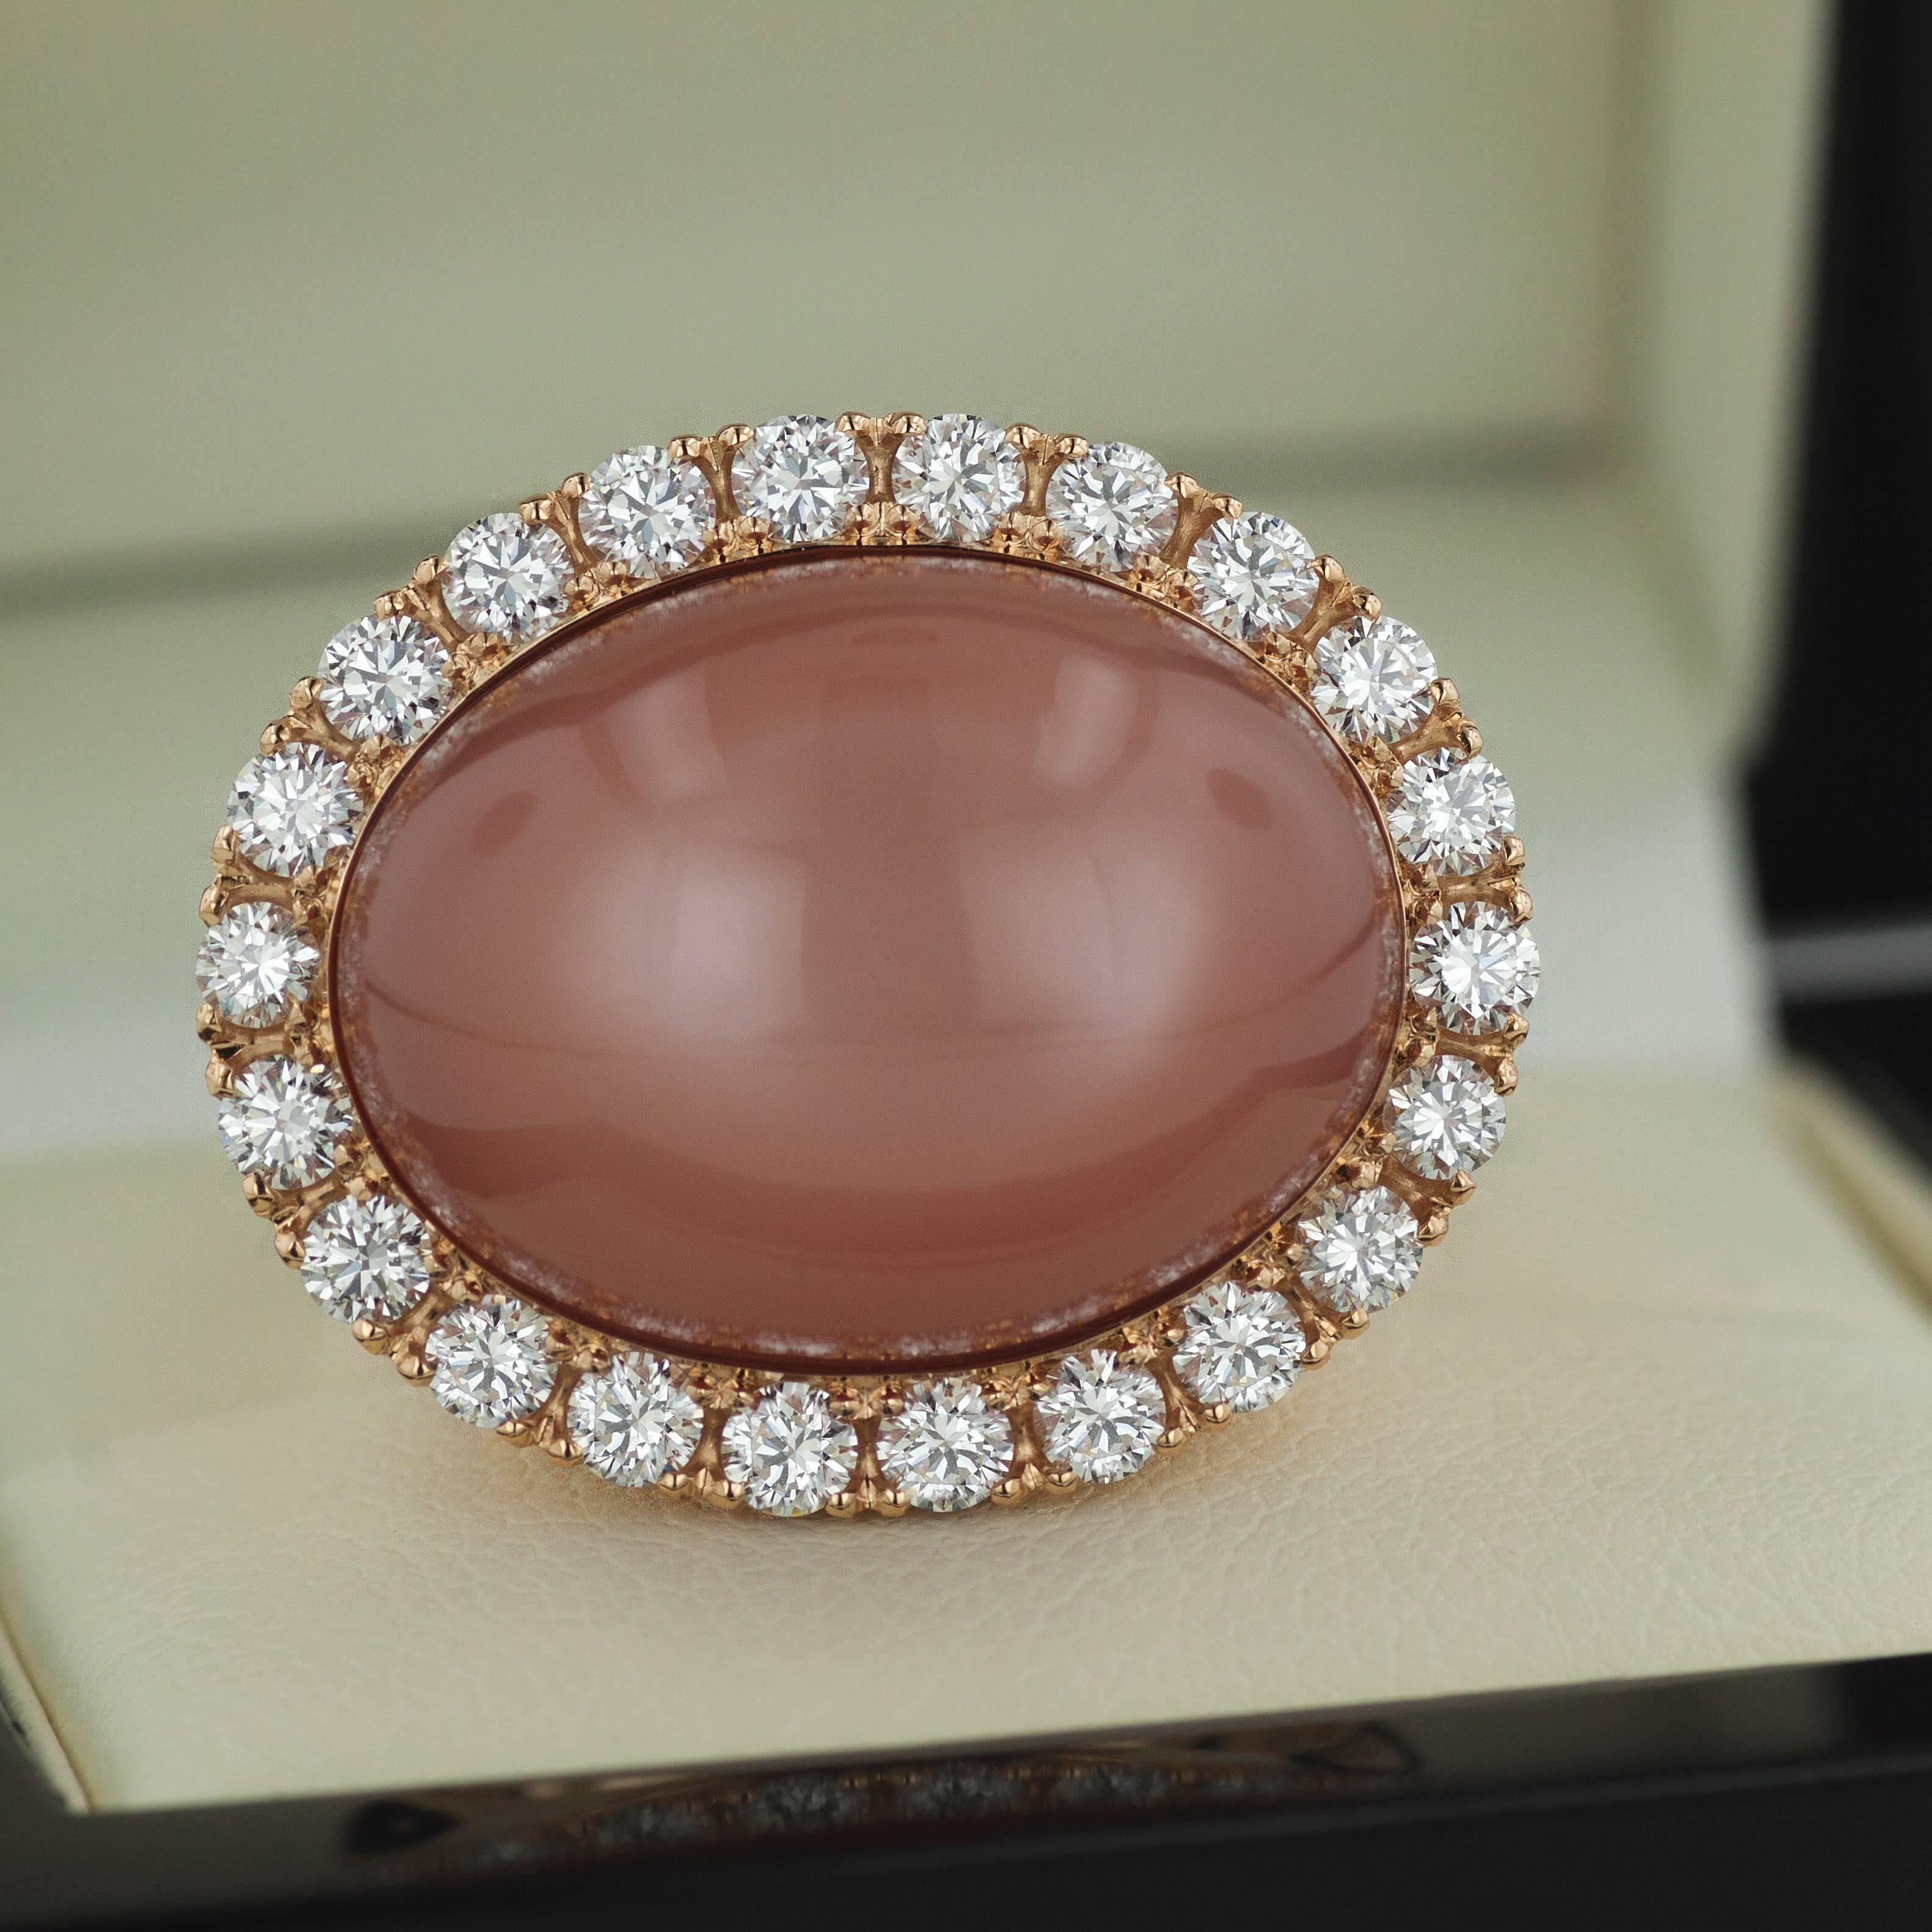 This stunning 18K rose gold women’s fashion ring features a large 22.90-carat rectangle moonstone cabochon at the top, surrounded by a halo of sparkling round cut diamonds with a total of 1.76 carat. The masterfully pave set halo adds a brilliant